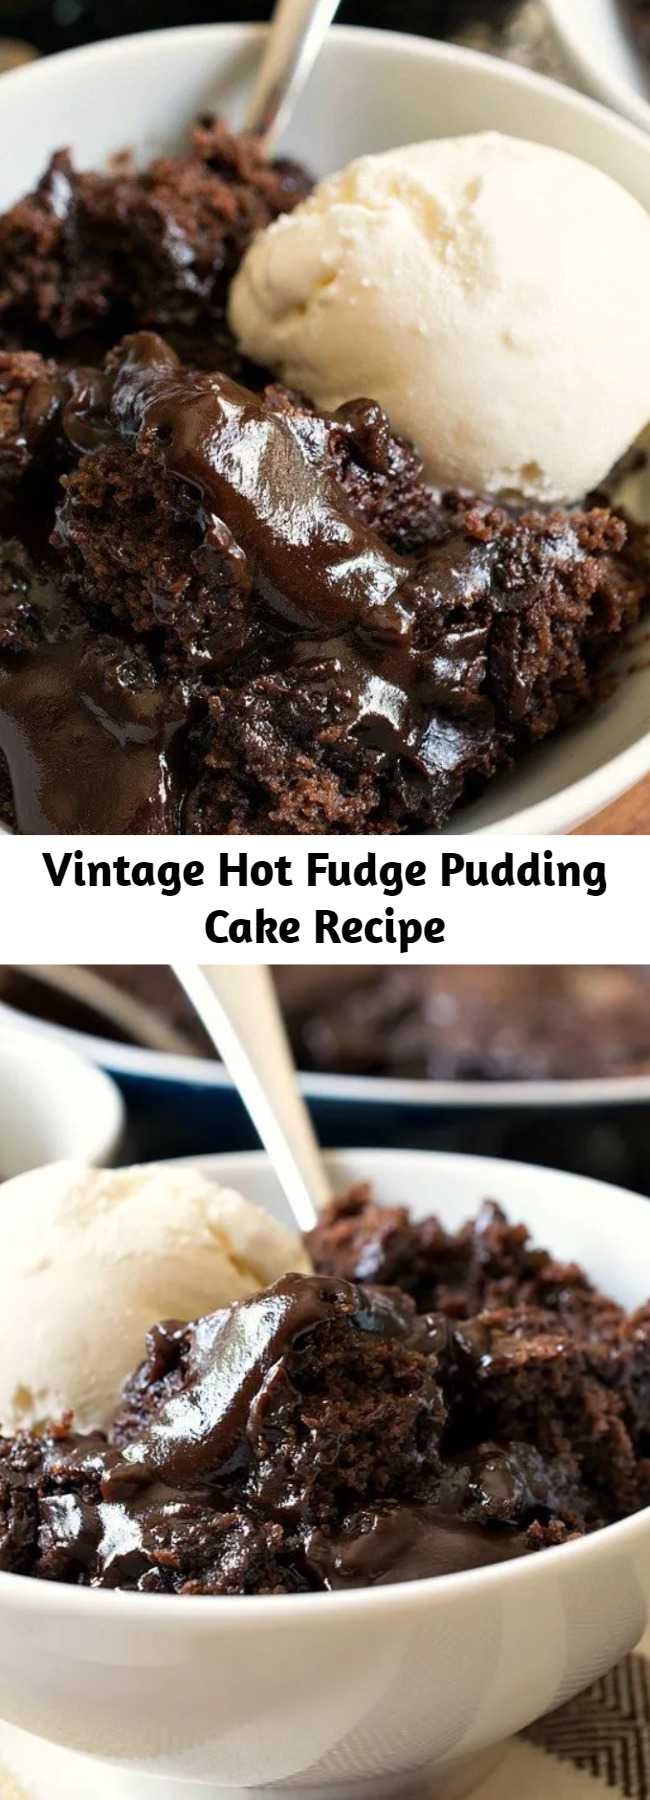 Hot Fudge Pudding Cake is a delicious, easy vintage recipe that everyone absolutely loves! A fudge sauce forms under a rich chocolate cake as it bakes in the oven. #puddingcake #chocolatedessert